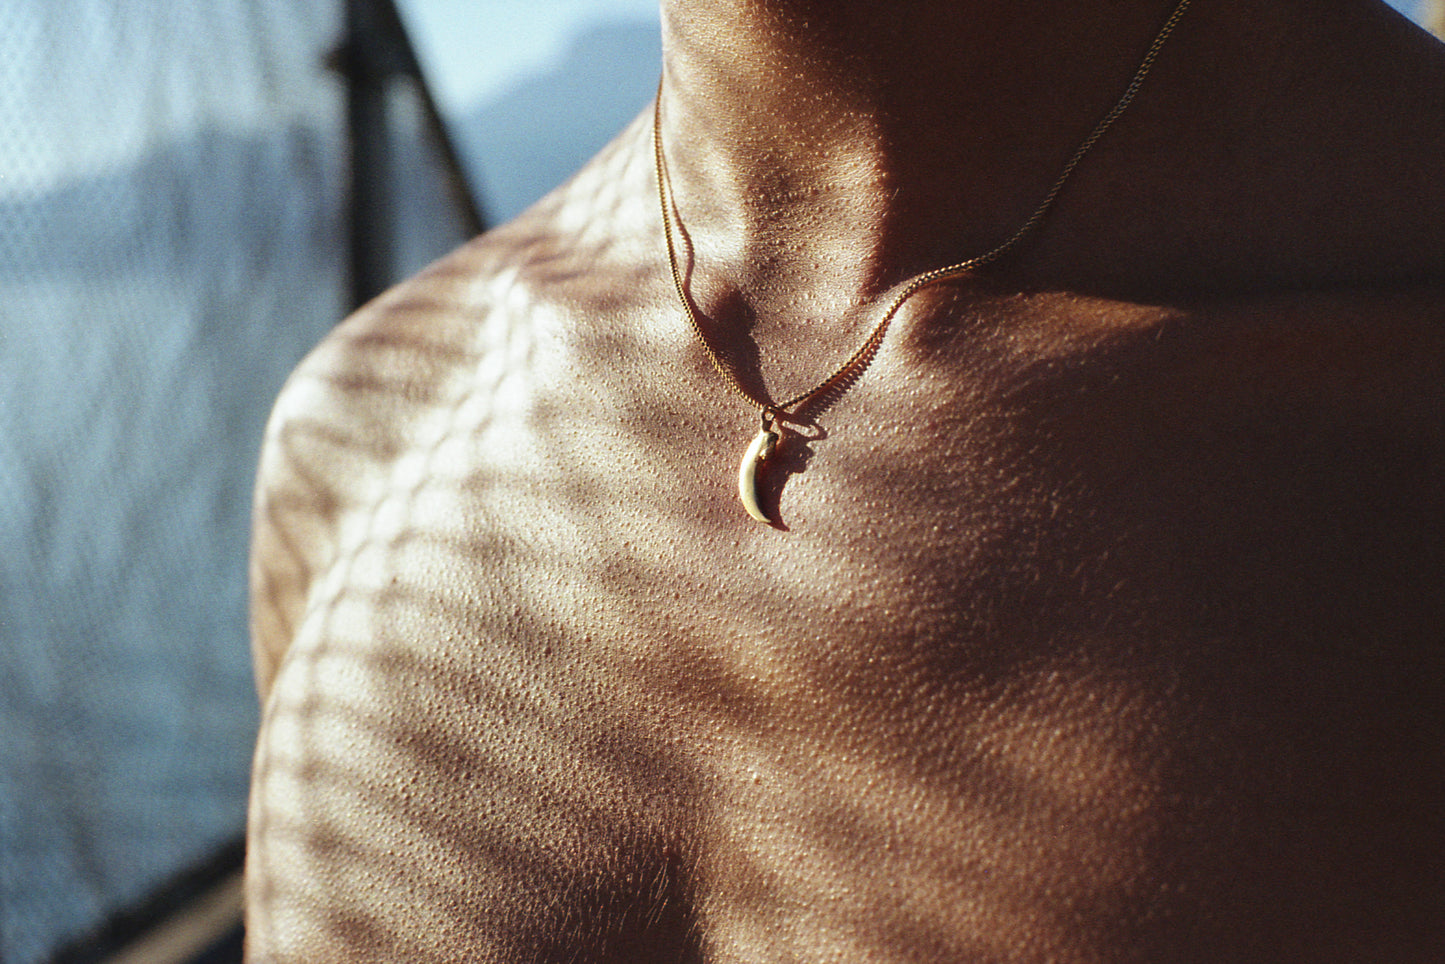 A photo of Ulysse wearing the Violette Stehli bat claw pendant.